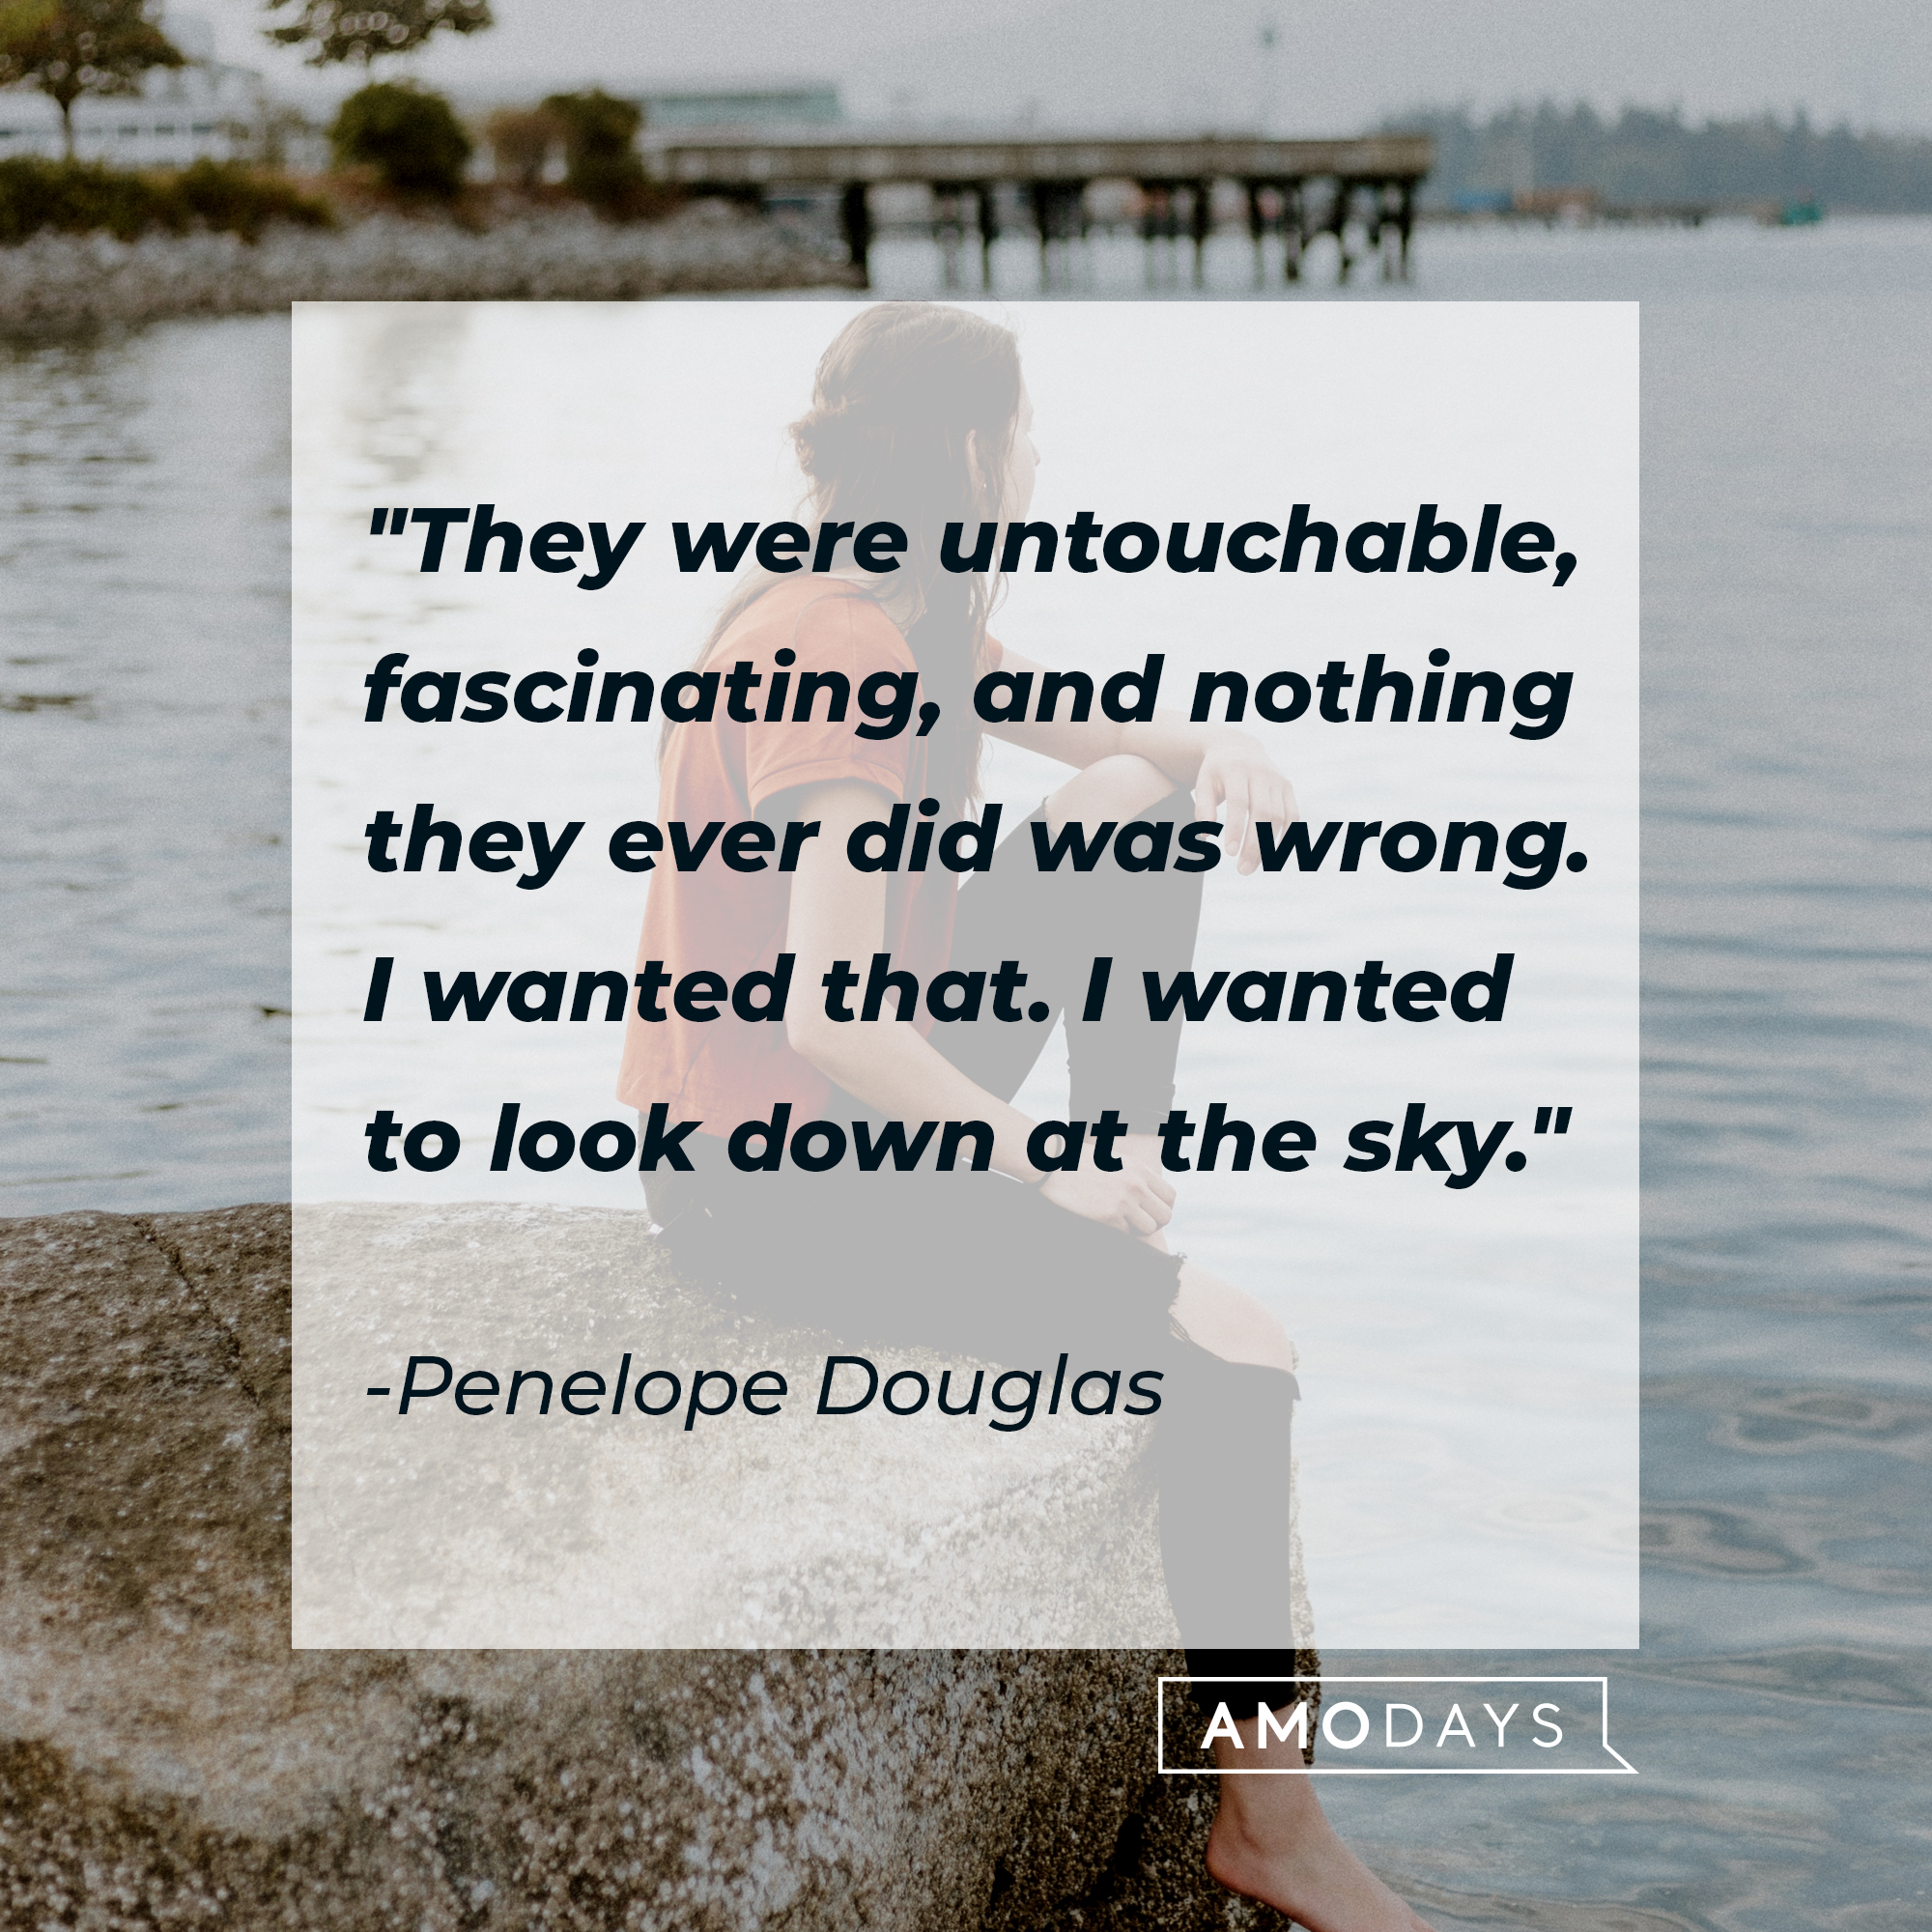 Penelope Douglas' quote: "They were untouchable, fascinating, and nothing they ever did was wrong. I wanted that. I wanted to look down at the sky." | Source: Unsplash